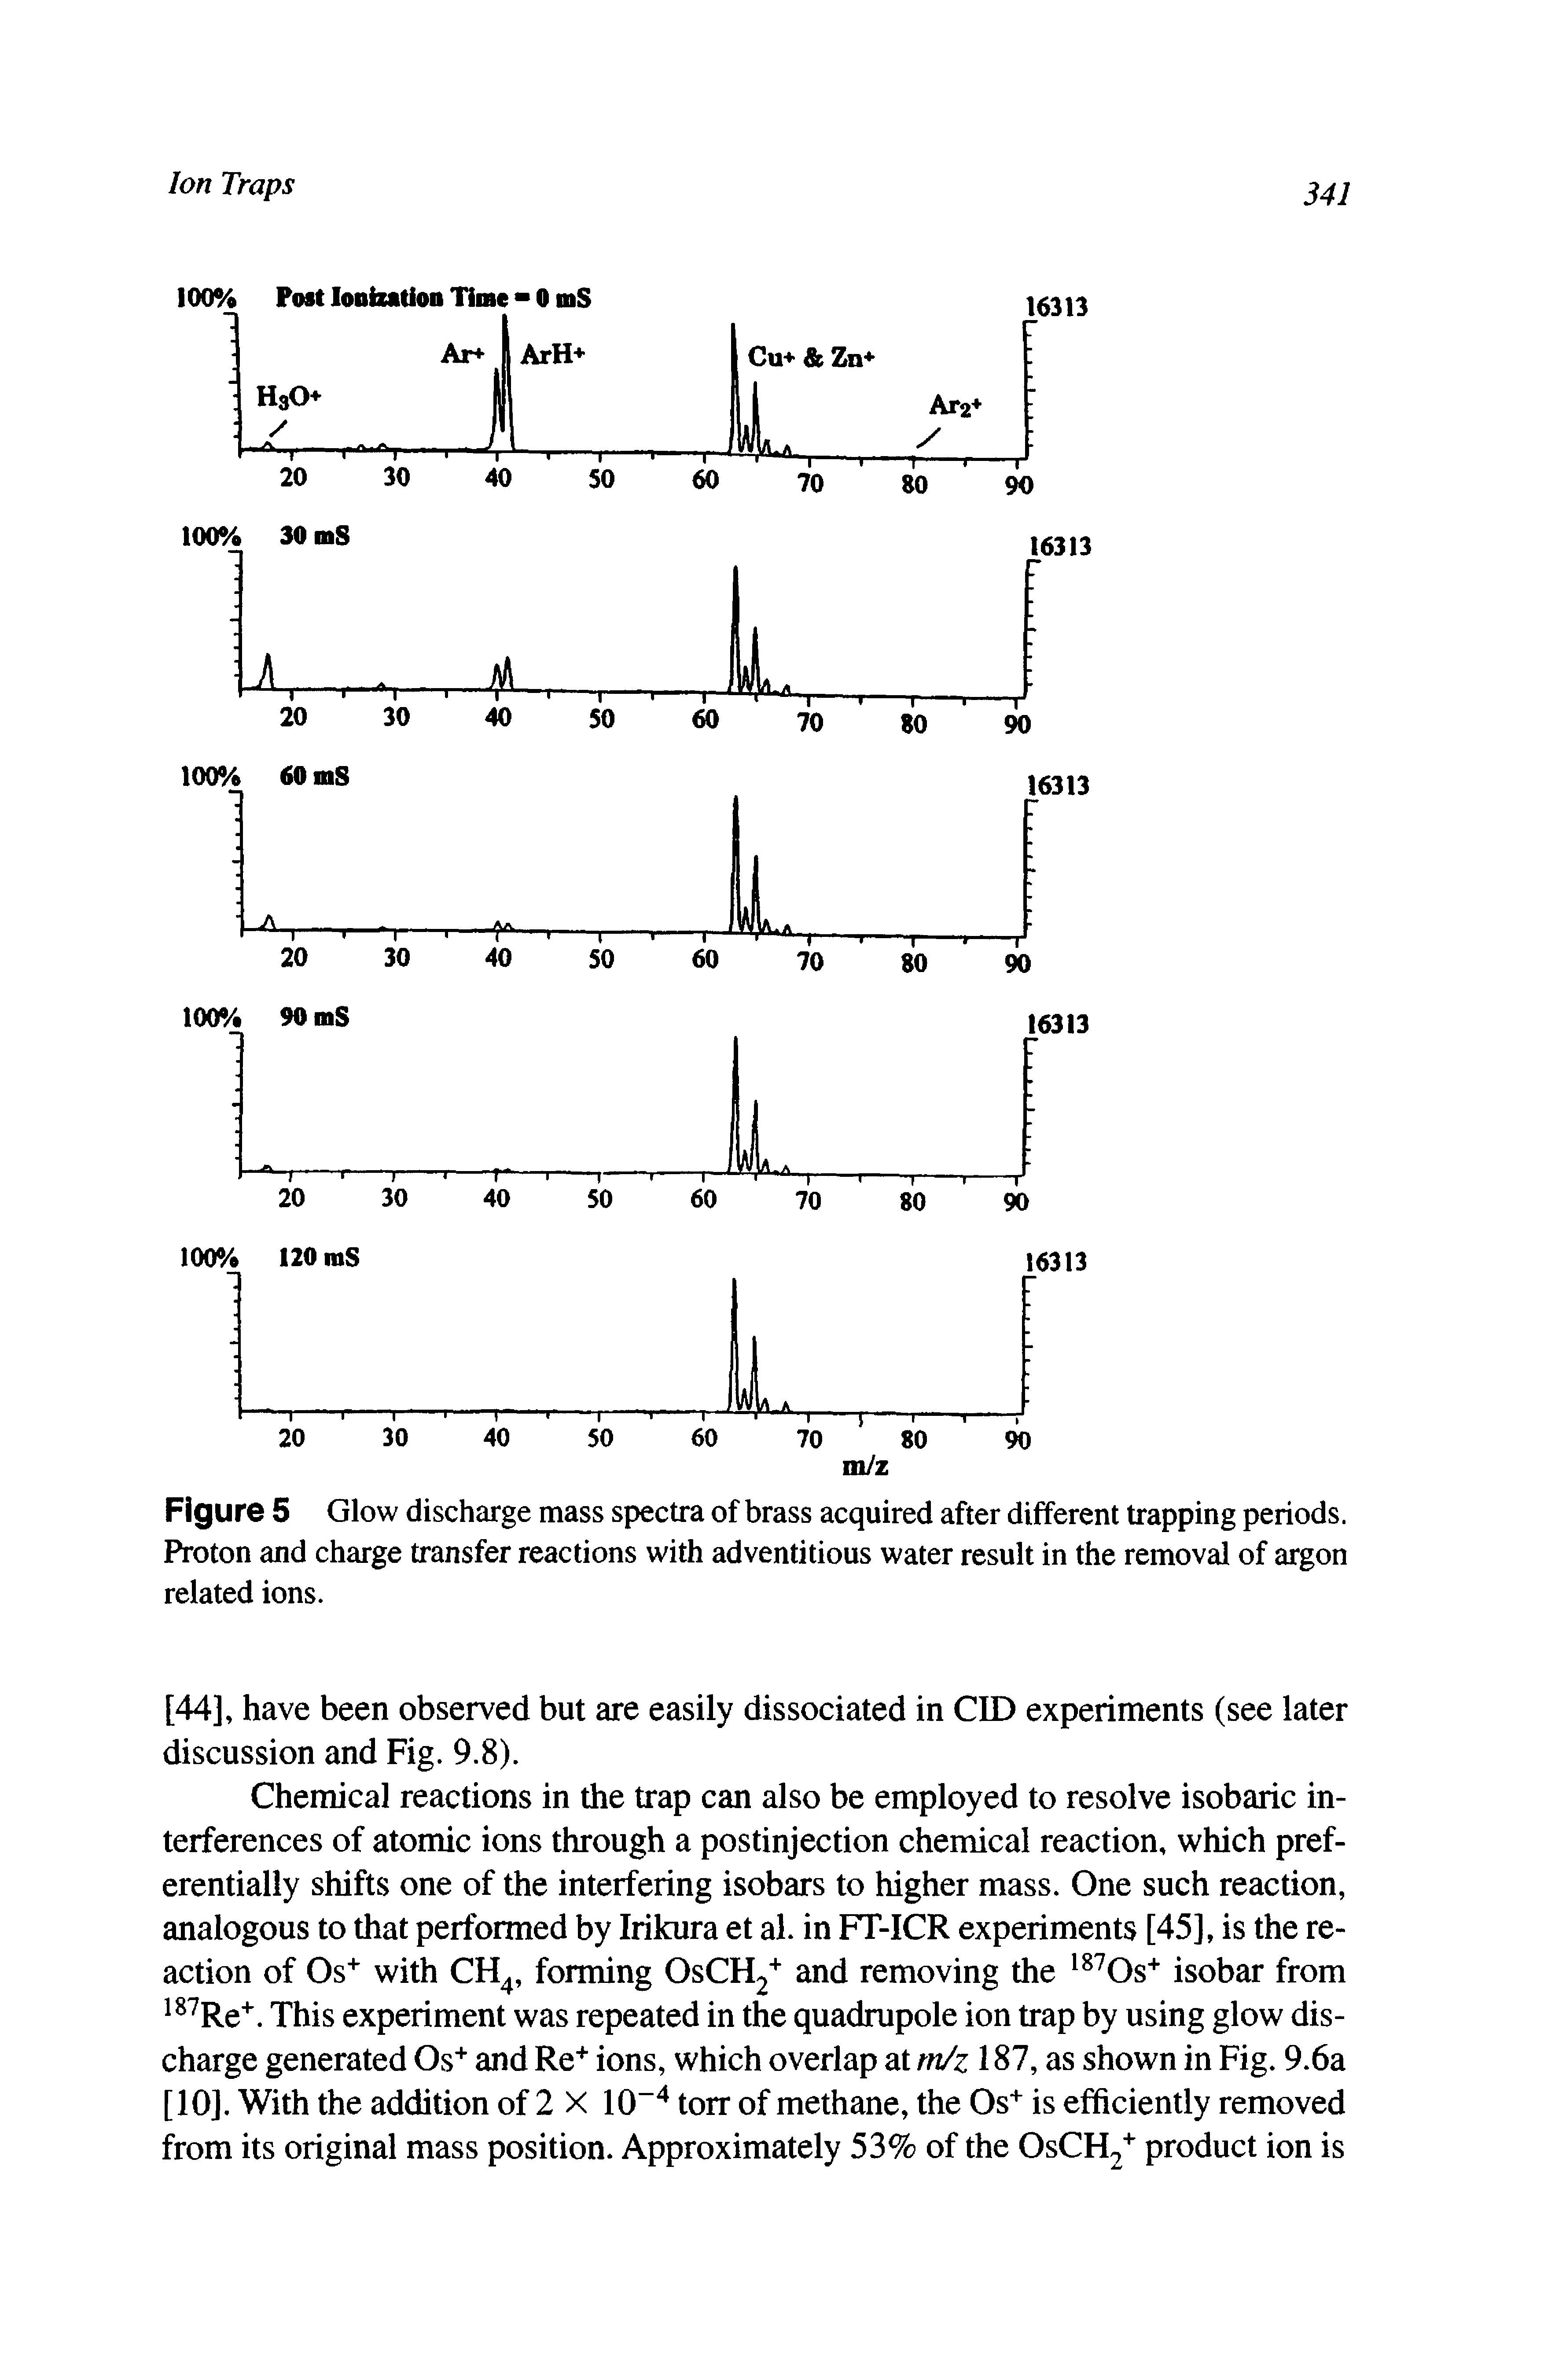 Figure 5 Glow discharge mass spectra of brass acquired after different trapping periods. Proton and charge transfer reactions with adventitious water result in the removal of argon related ions.